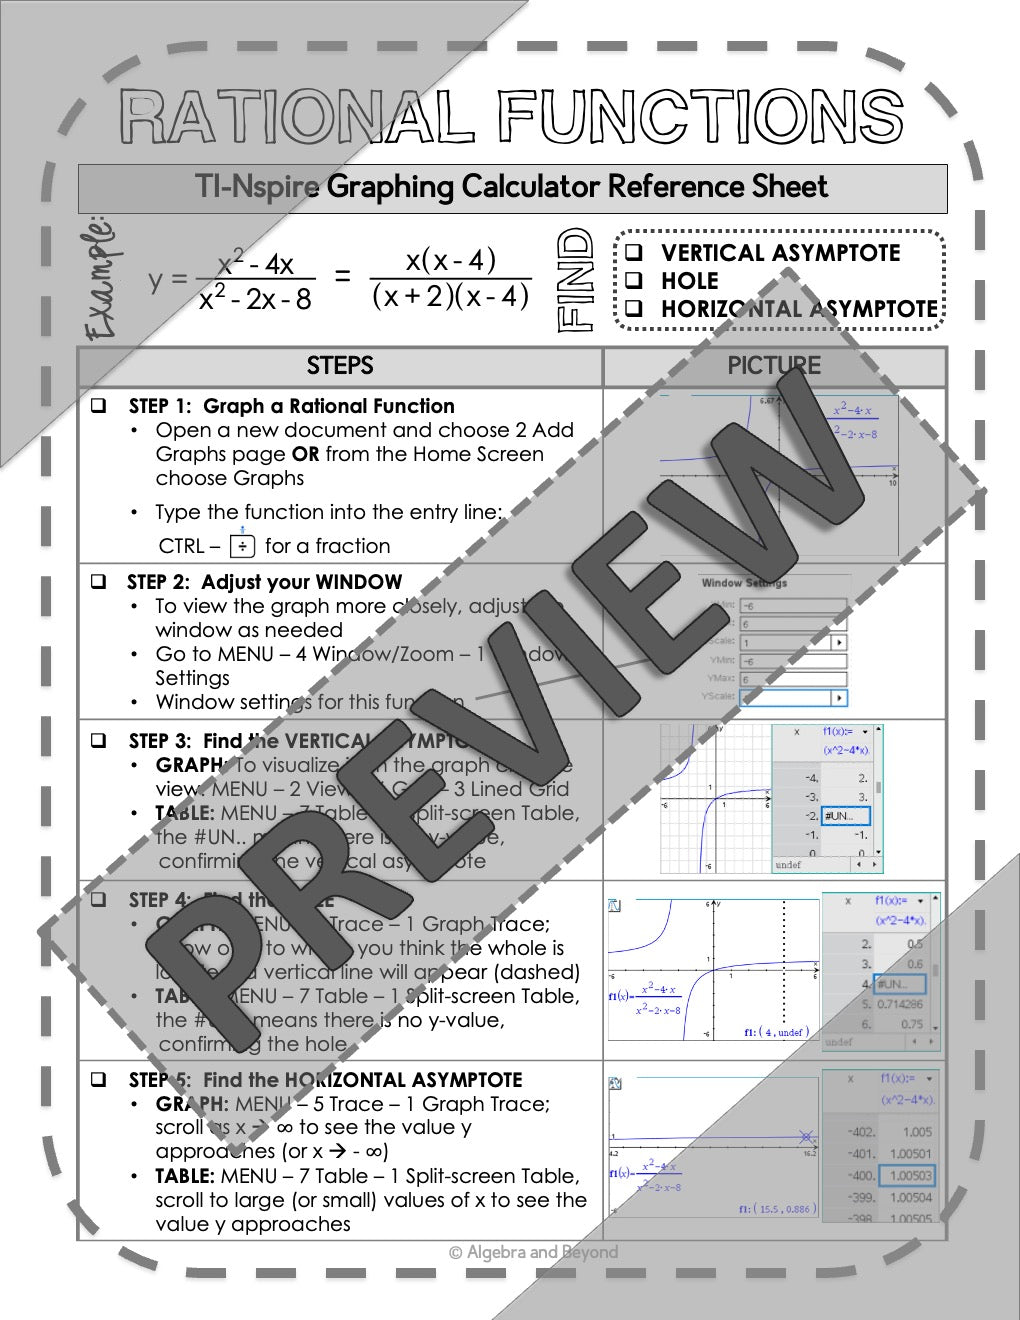 Graphing Rational Functions | TI-Nspire Calculator Reference Sheets